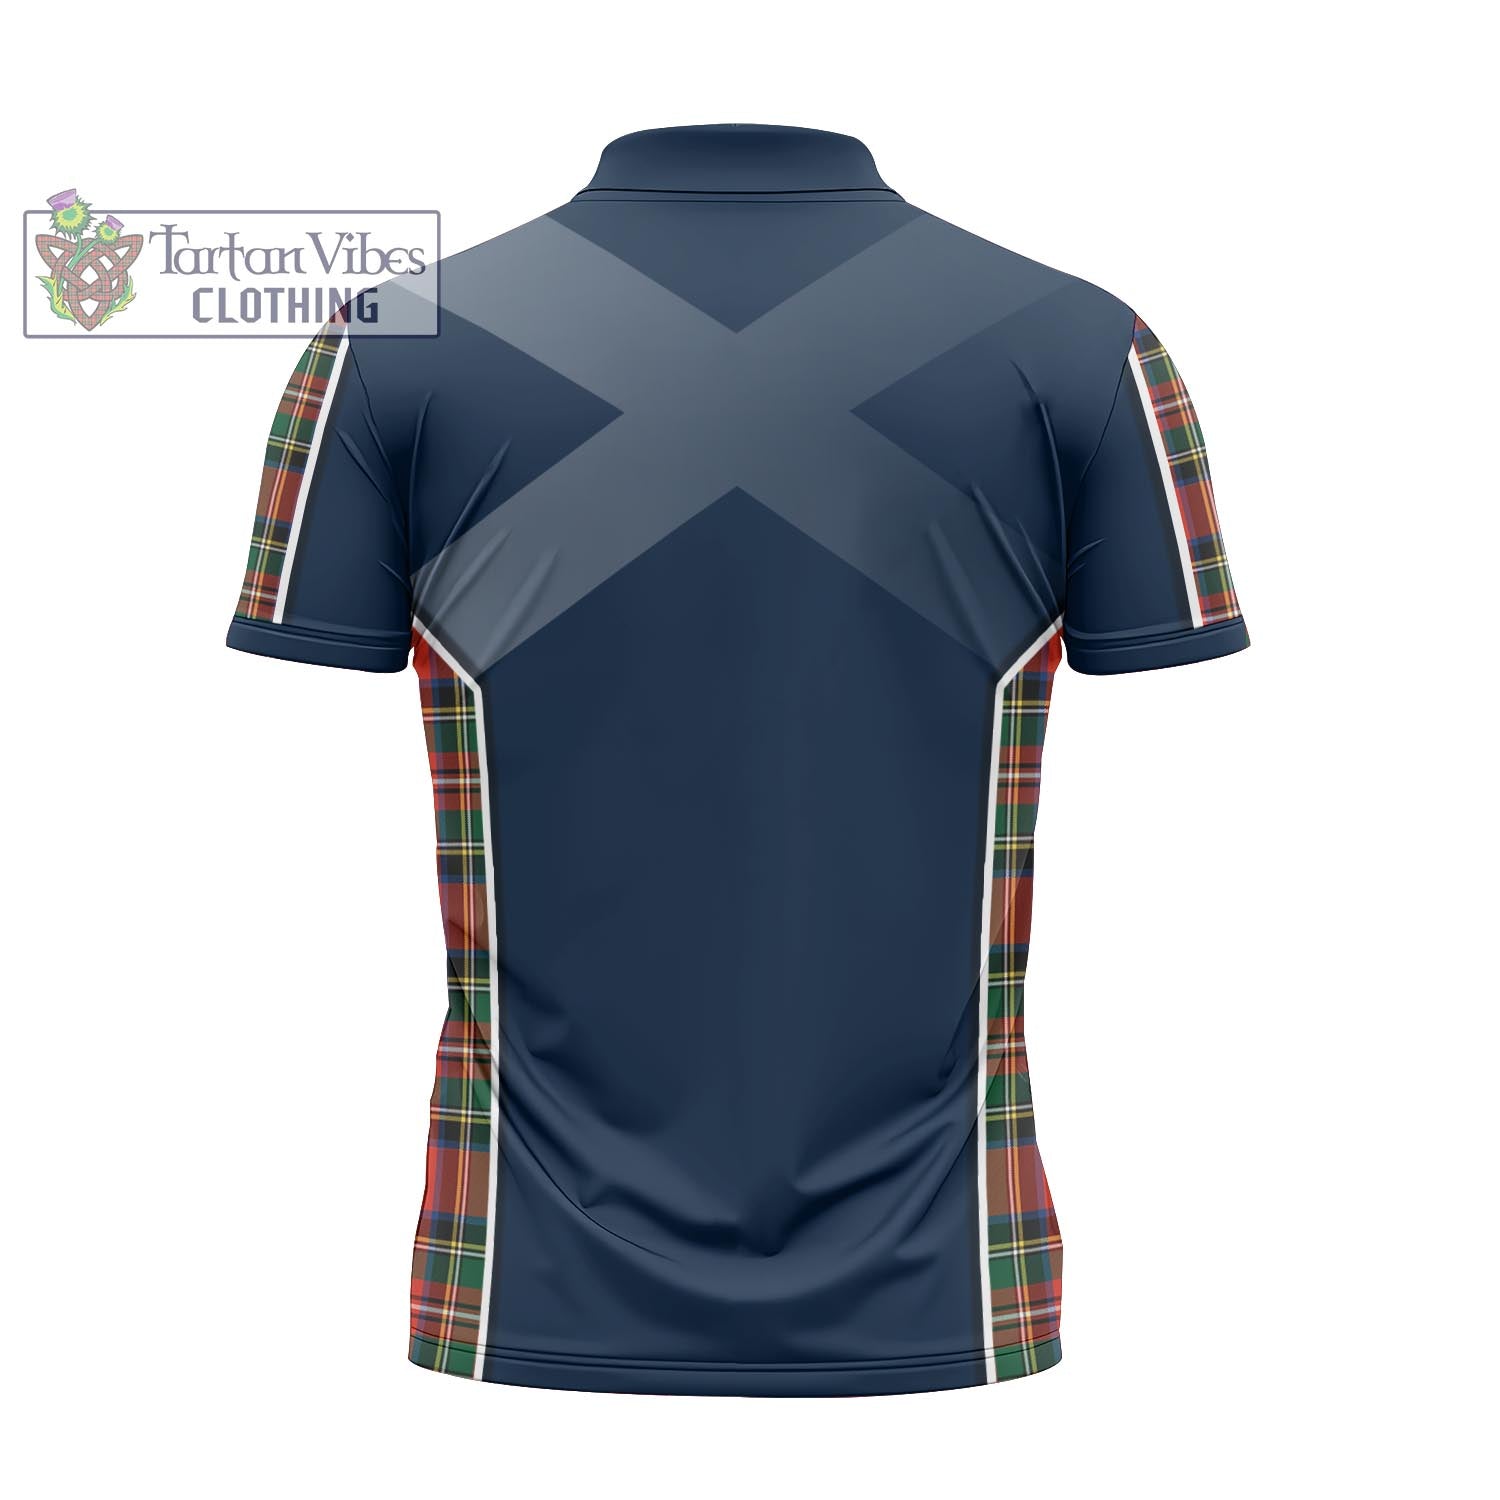 Tartan Vibes Clothing Lyle Tartan Zipper Polo Shirt with Family Crest and Lion Rampant Vibes Sport Style